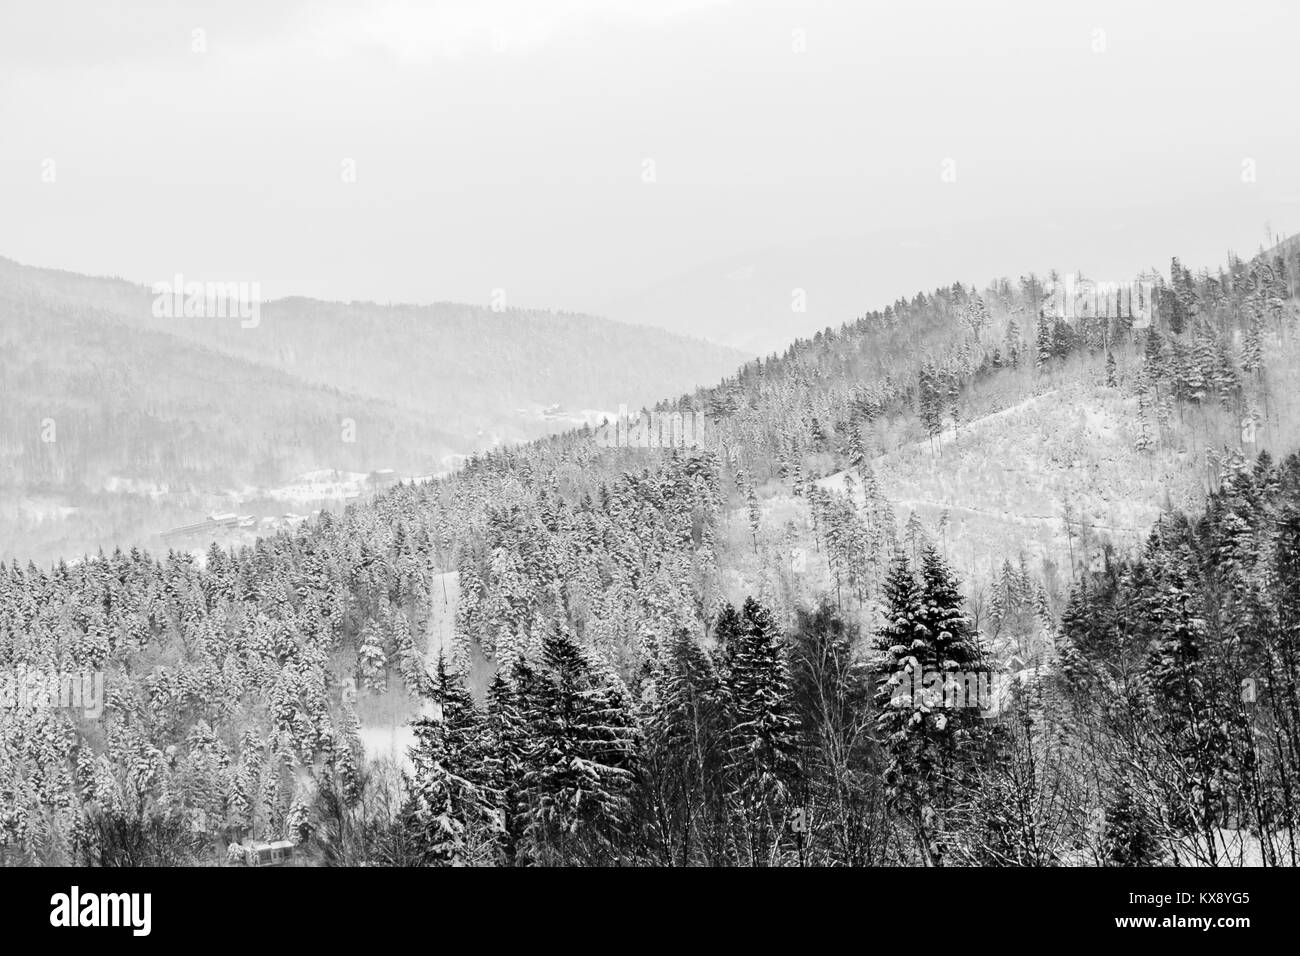 Landscape view on a Beskid mountains in Szczyrk covered in white snow Stock Photo